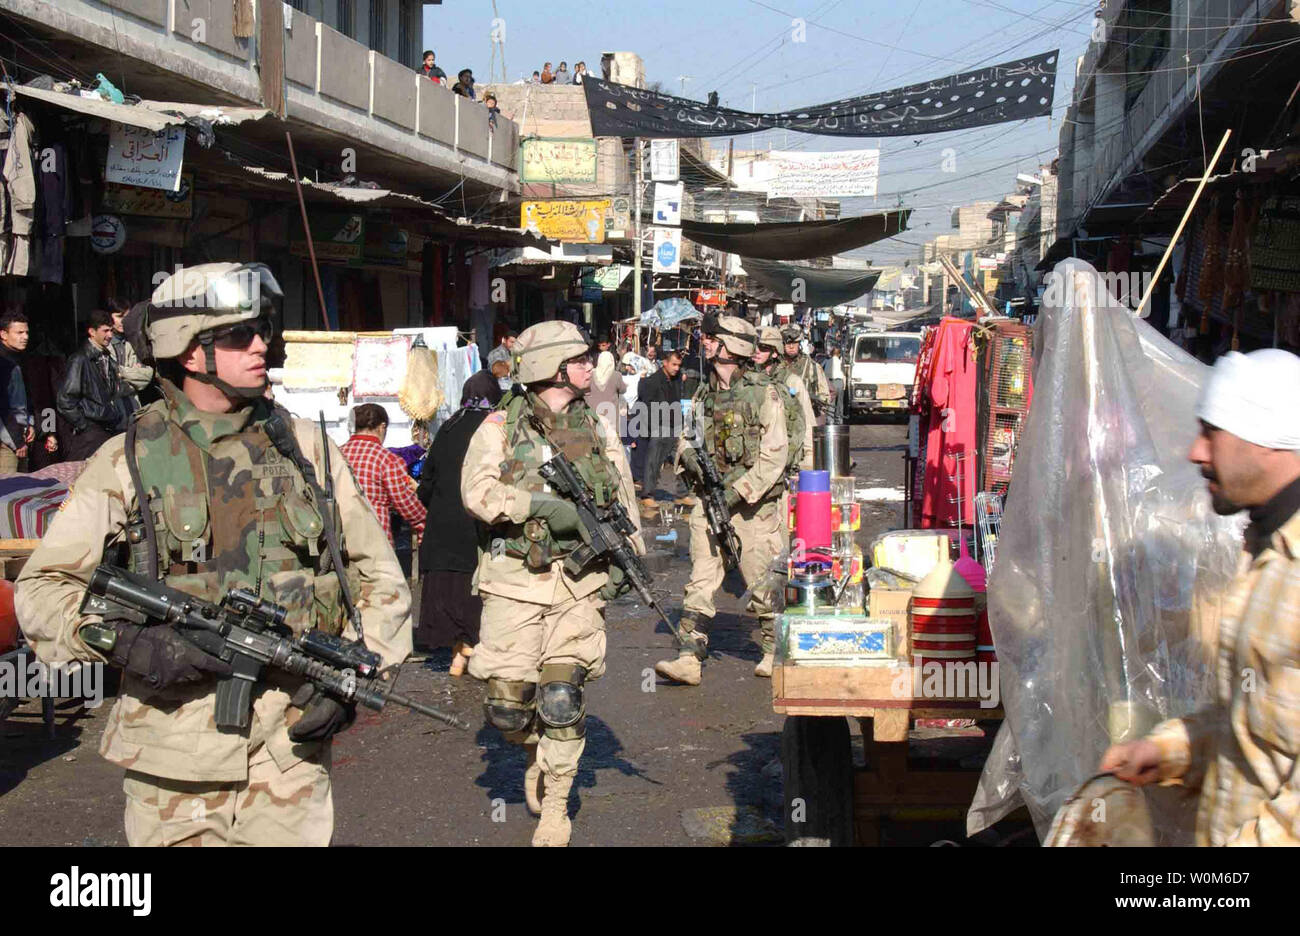 U.S. Army soldiers walk through a market in the Al Sudeek district during a dismounted patrol in Mosul, Iraq, on Jan. 9, 2005.  The soldiers are assigned to Bravo Company, 2nd Battalion, 325th Parachute Infantry Regiment, attached to Task Force Tacoma.  (UPI Photo/ Adam Sanders/Army) Stock Photo